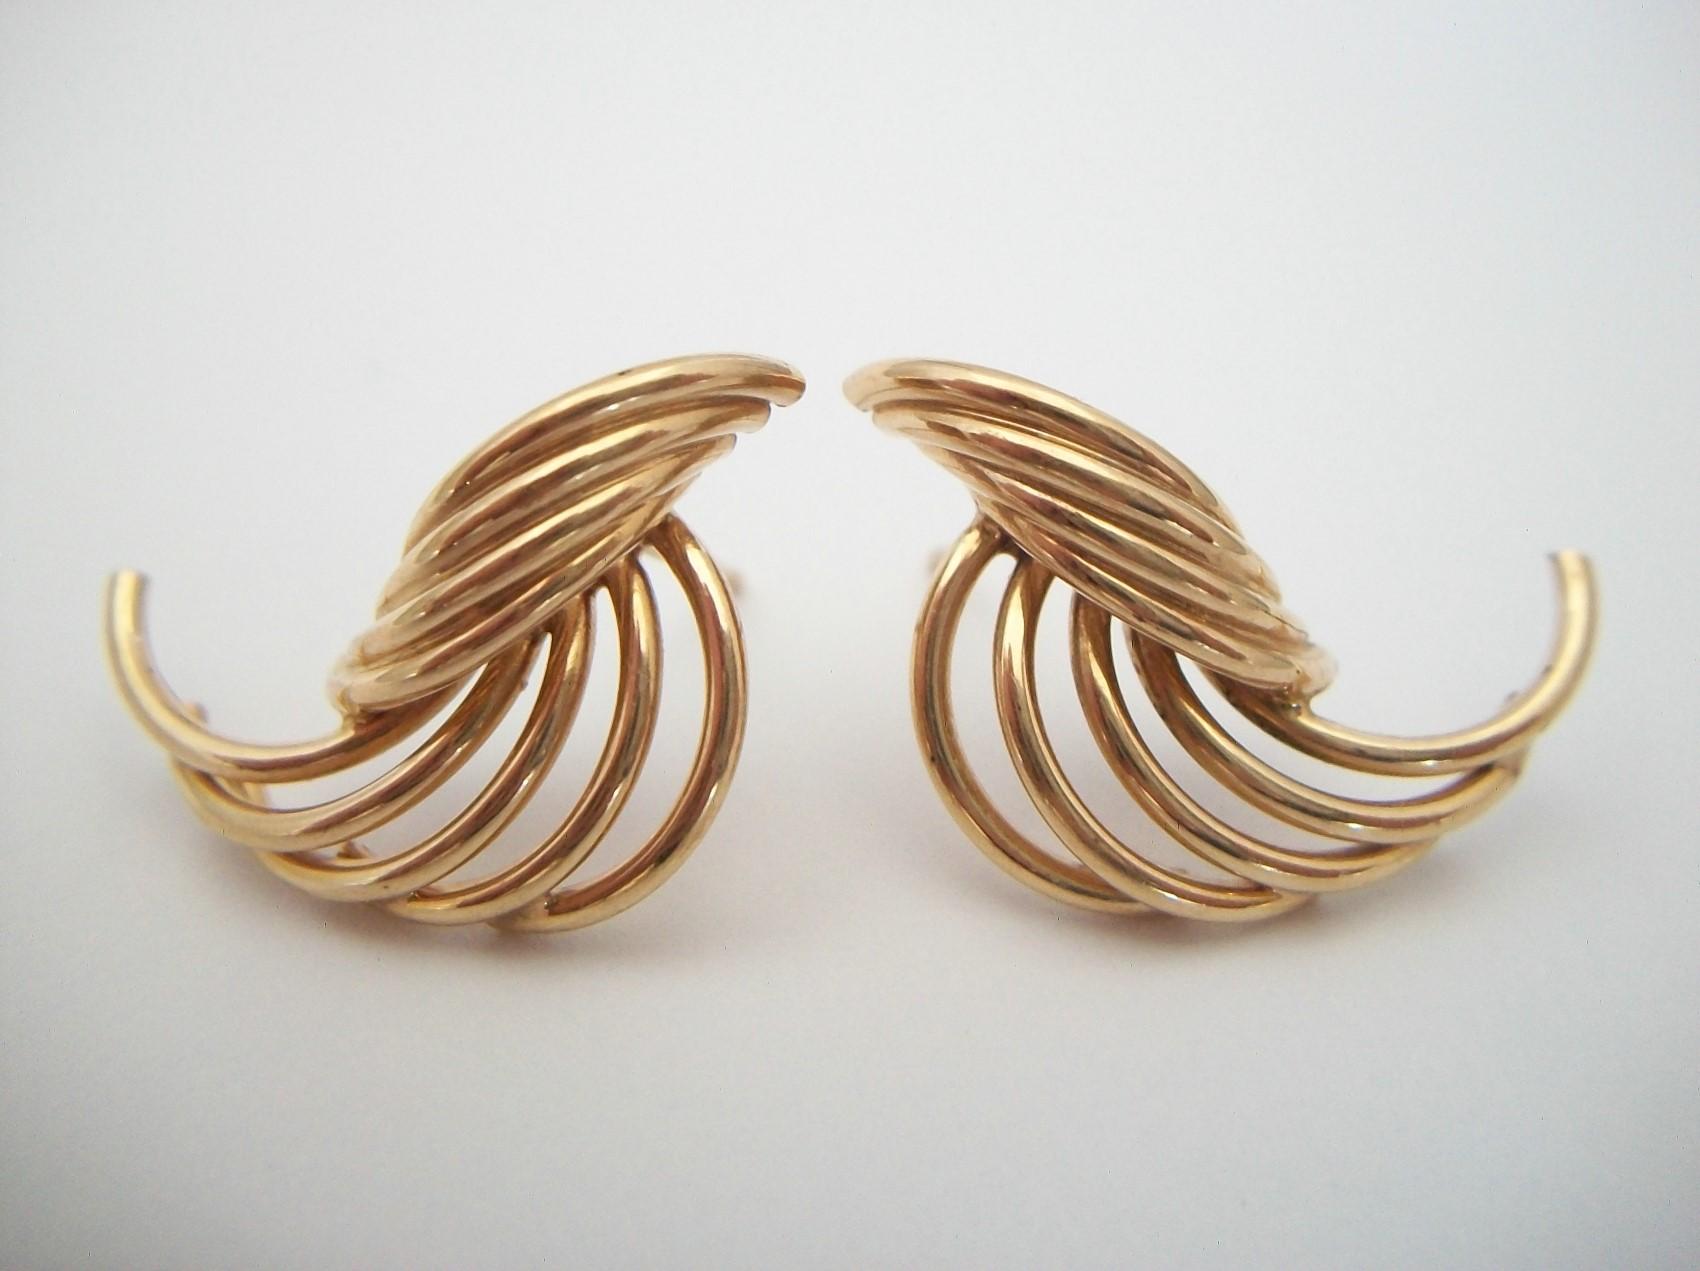 Retro Vintage Pair of 10K Yellow Gold Earrings - U.S. - Circa 1990's For Sale